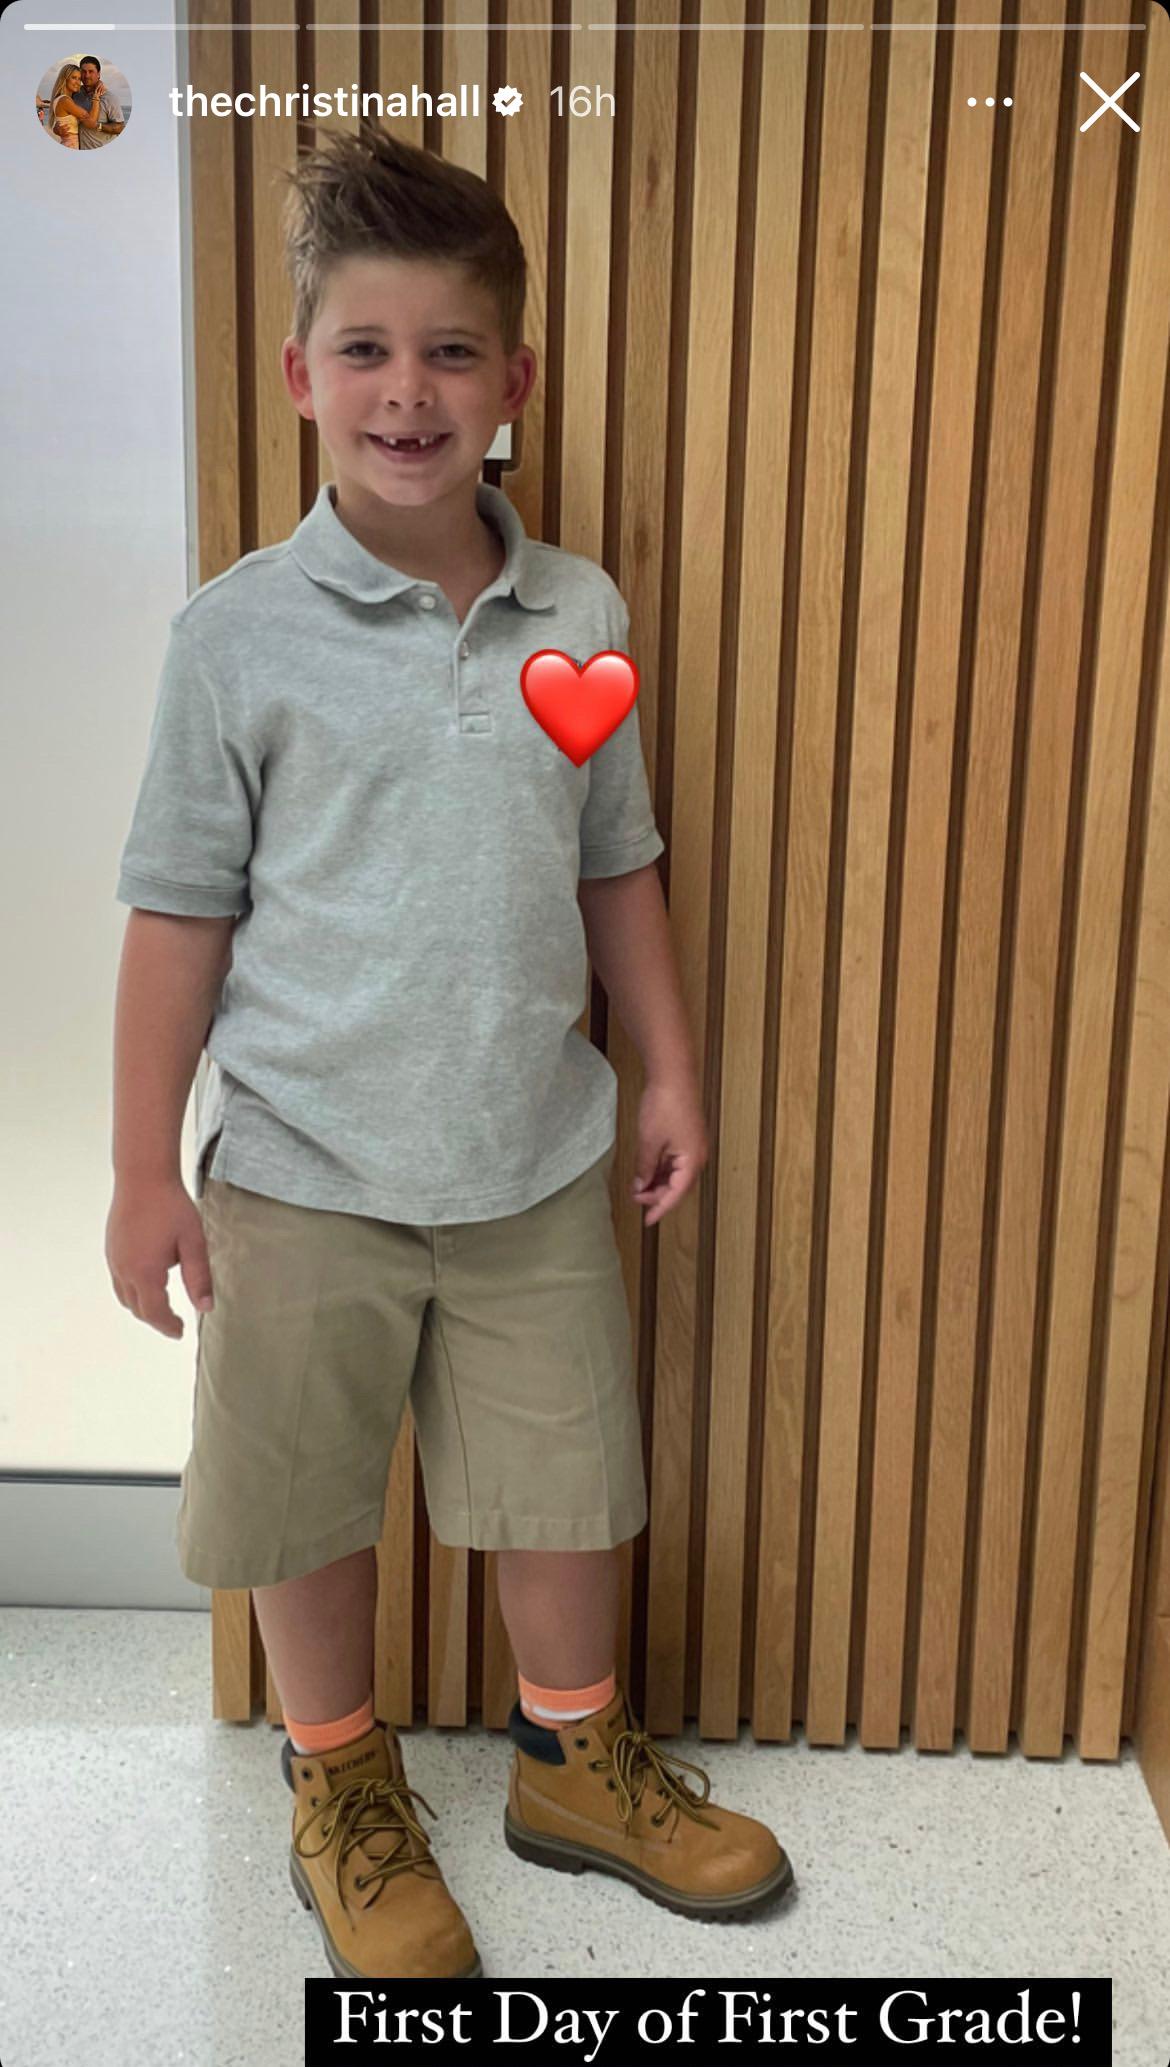 A portrait of Christina Hall's son Brayden posted on her Instagram story